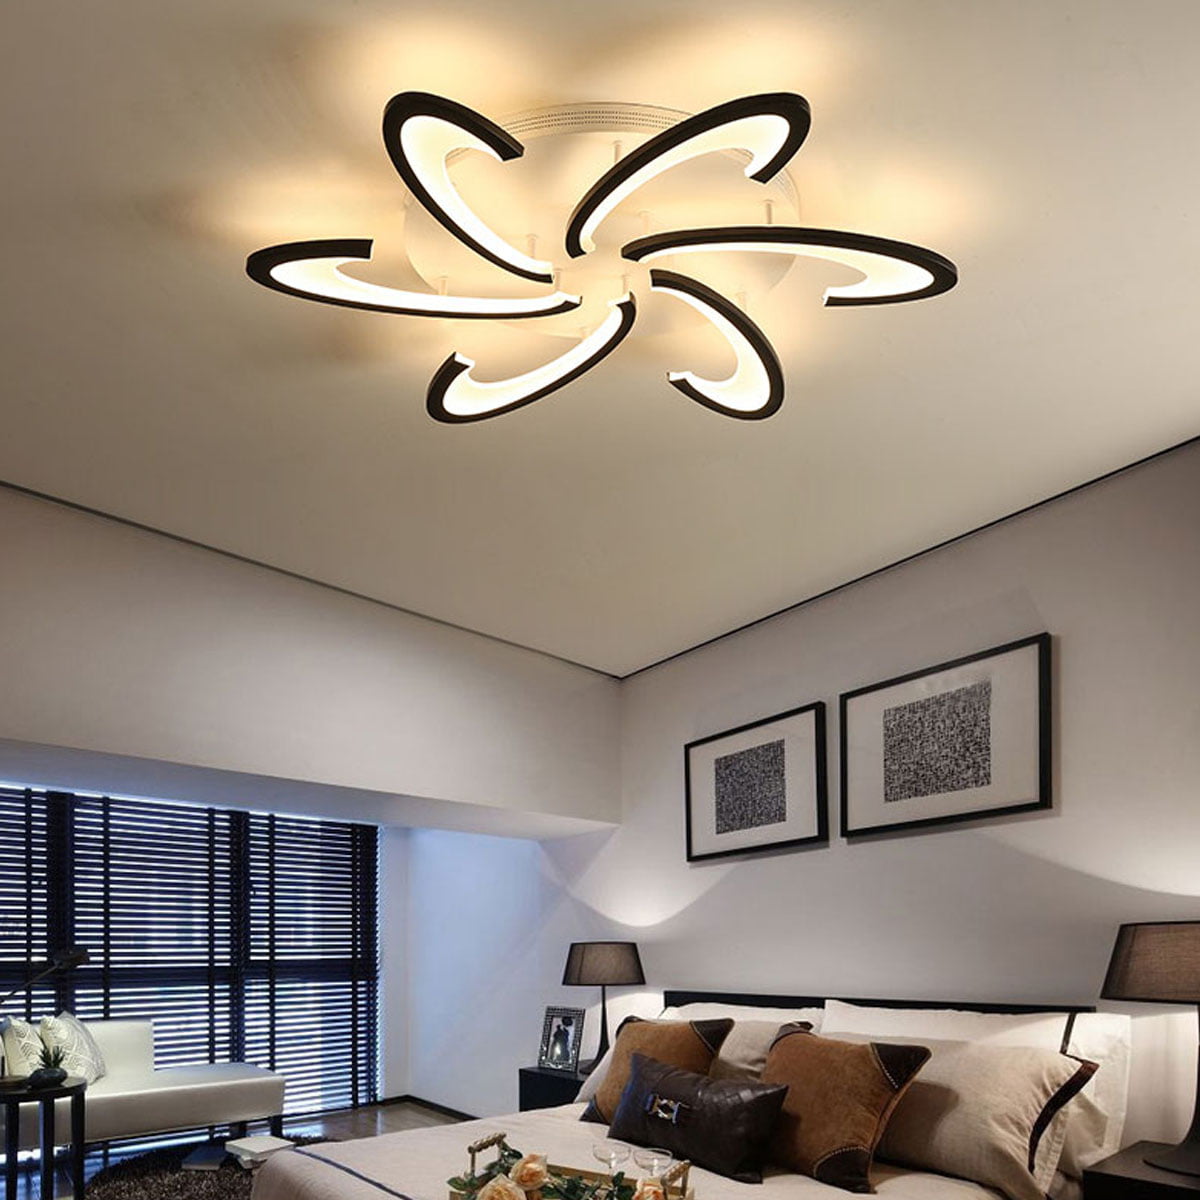 Dimmable/N 3W LED Ceiling Lamp Wall Light Fixture Flush Mounted Lighting Hotel 